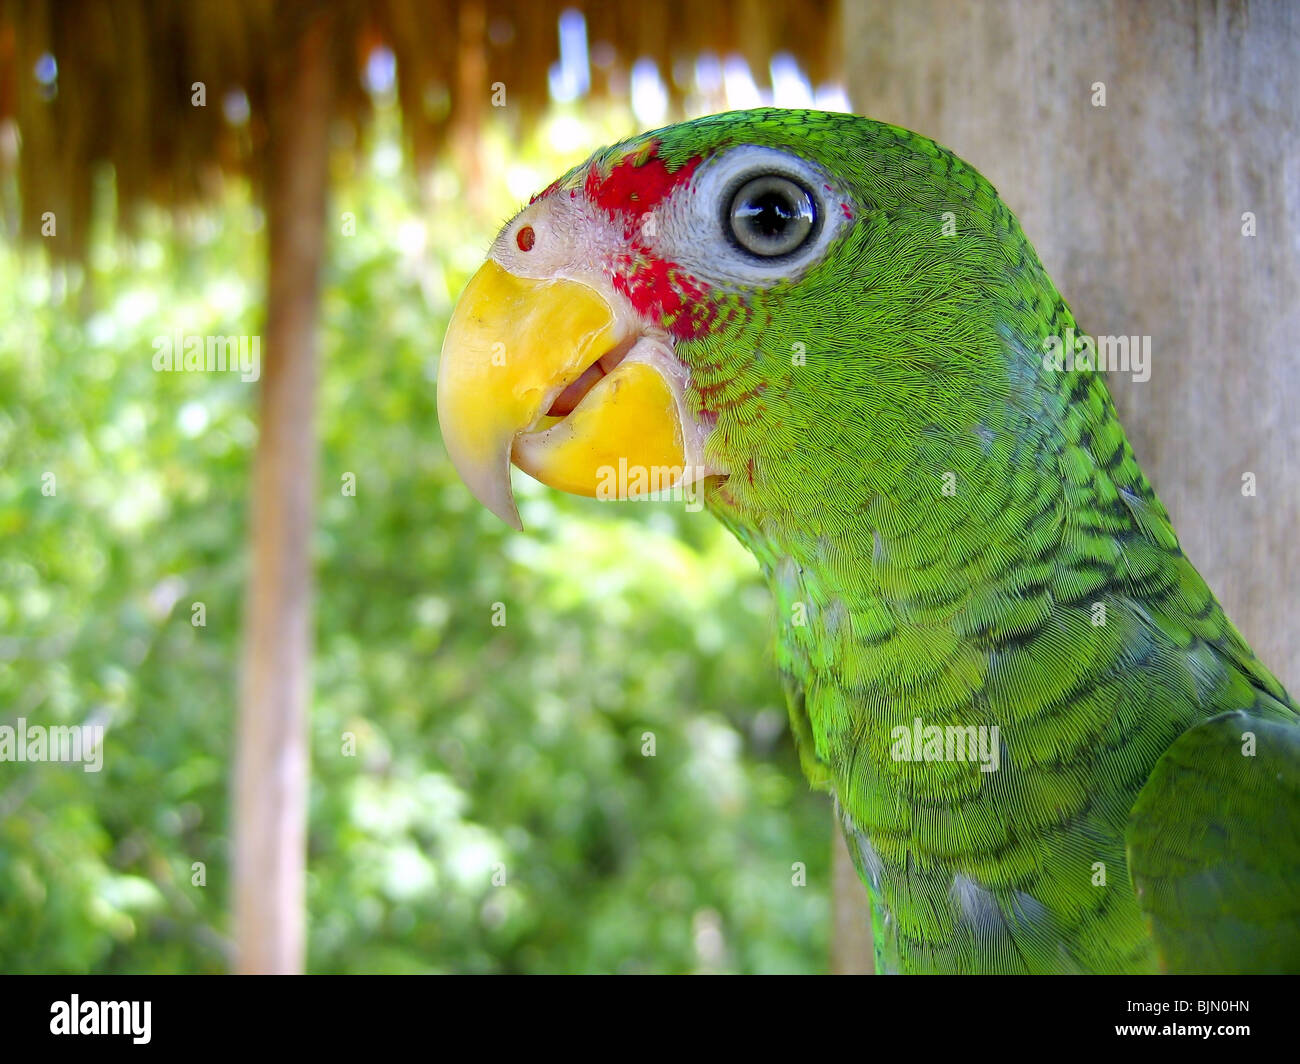 cotorra parrot green from Central America Mexico jungle Stock Photo